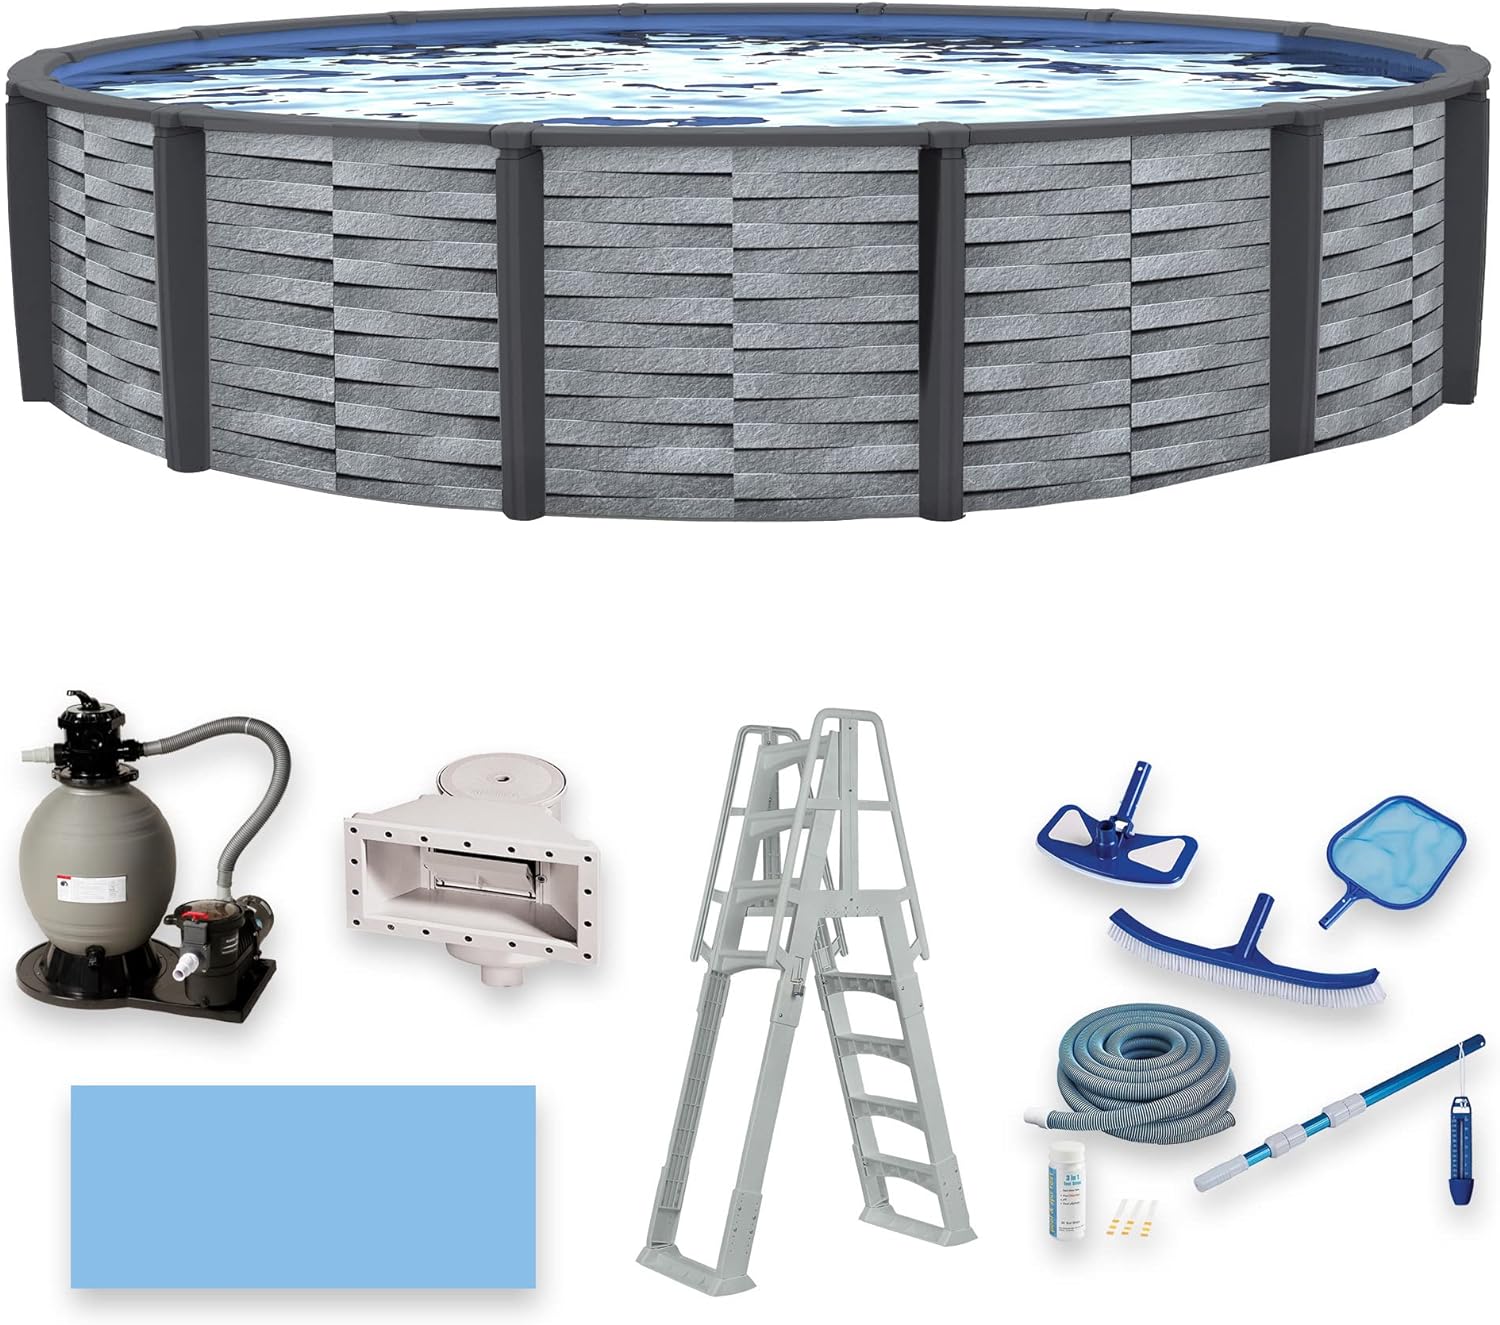 Affinity 24' Round 52" Deep 7" Top Rail Resin Above Ground Swimming Pool Package